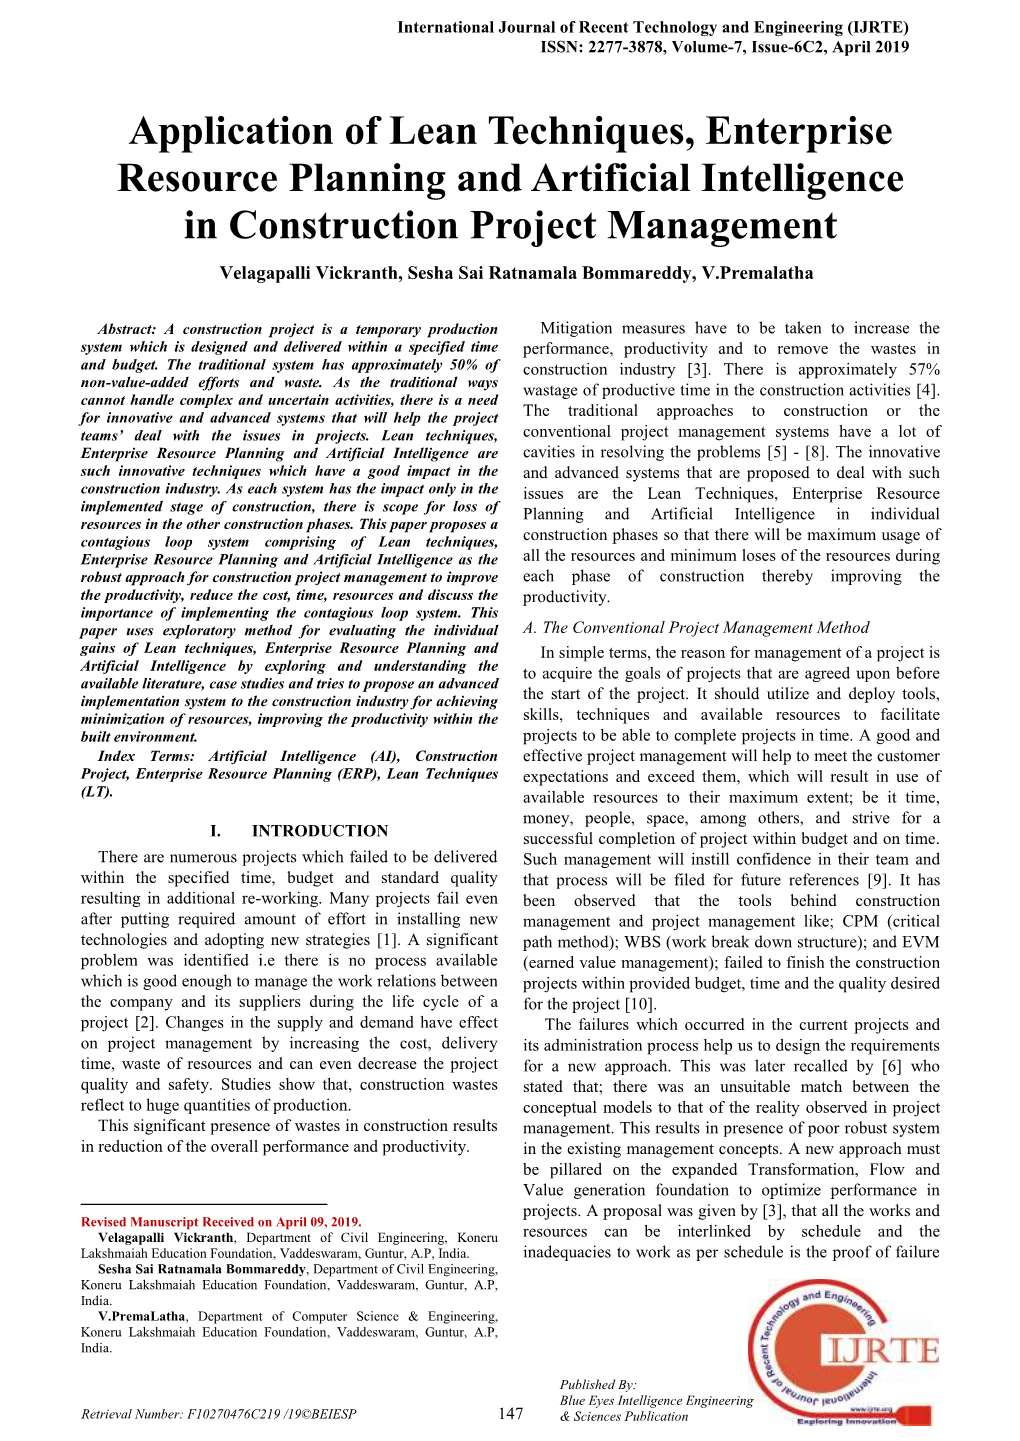 Application of Lean Techniques, Enterprise Resource Planning and Artificial Intelligence in Construction Project Management